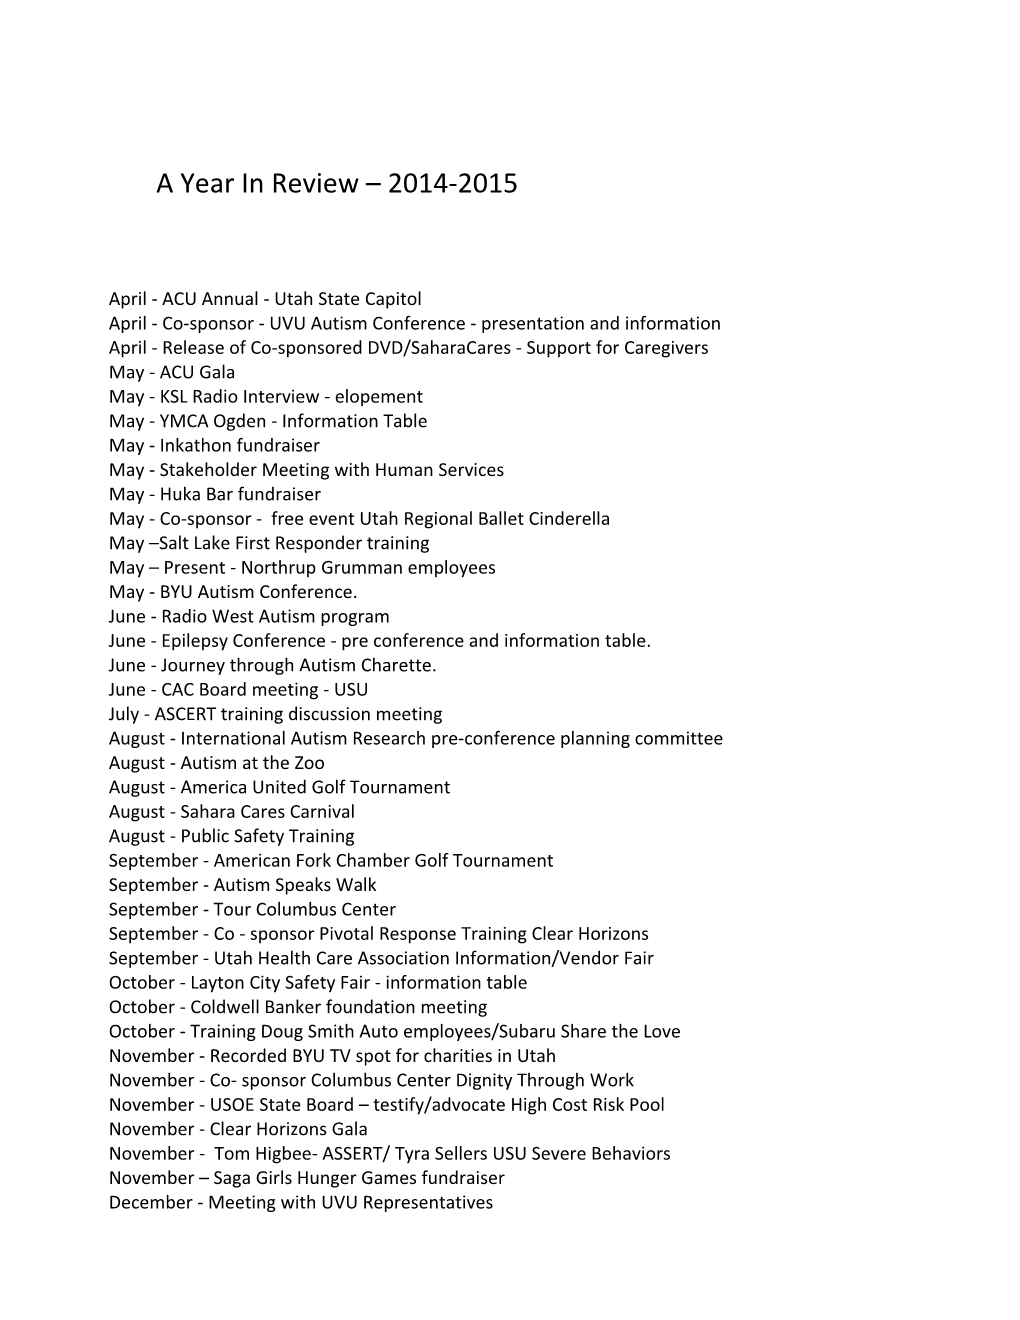 A Year in Review 2014-2015